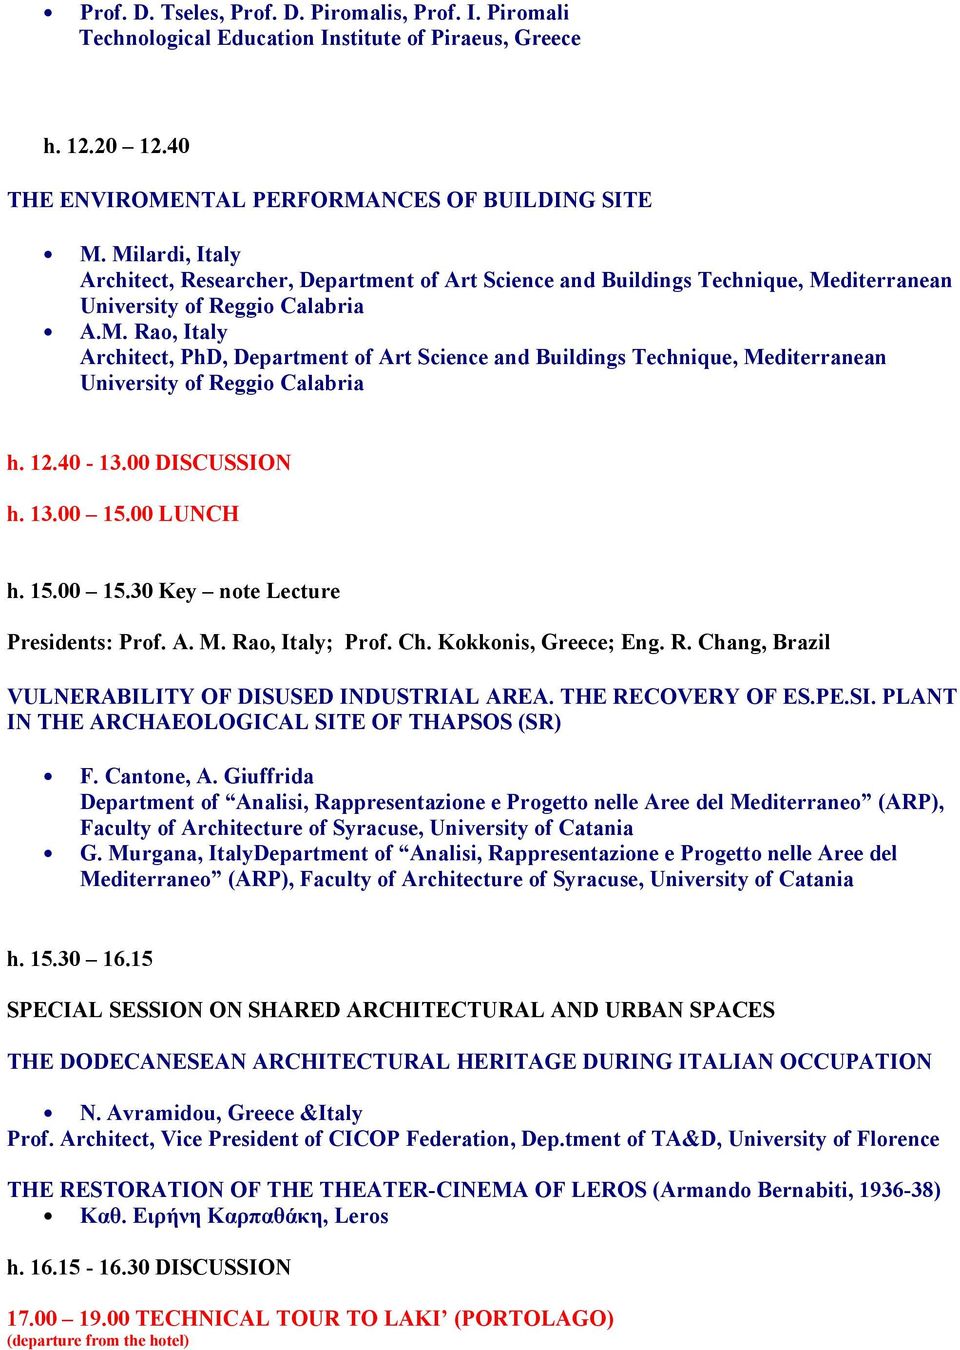 12.40-13.00 DISCUSSION h. 13.00 15.00 LUNCH h. 15.00 15.30 Key note Lecture Presidents: Prof. A. M. Rao, Italy; Prof. Ch. Kokkonis, Greece; Eng. R. Chang, Brazil VULNERABILITY OF DISUSED INDUSTRIAL AREA.